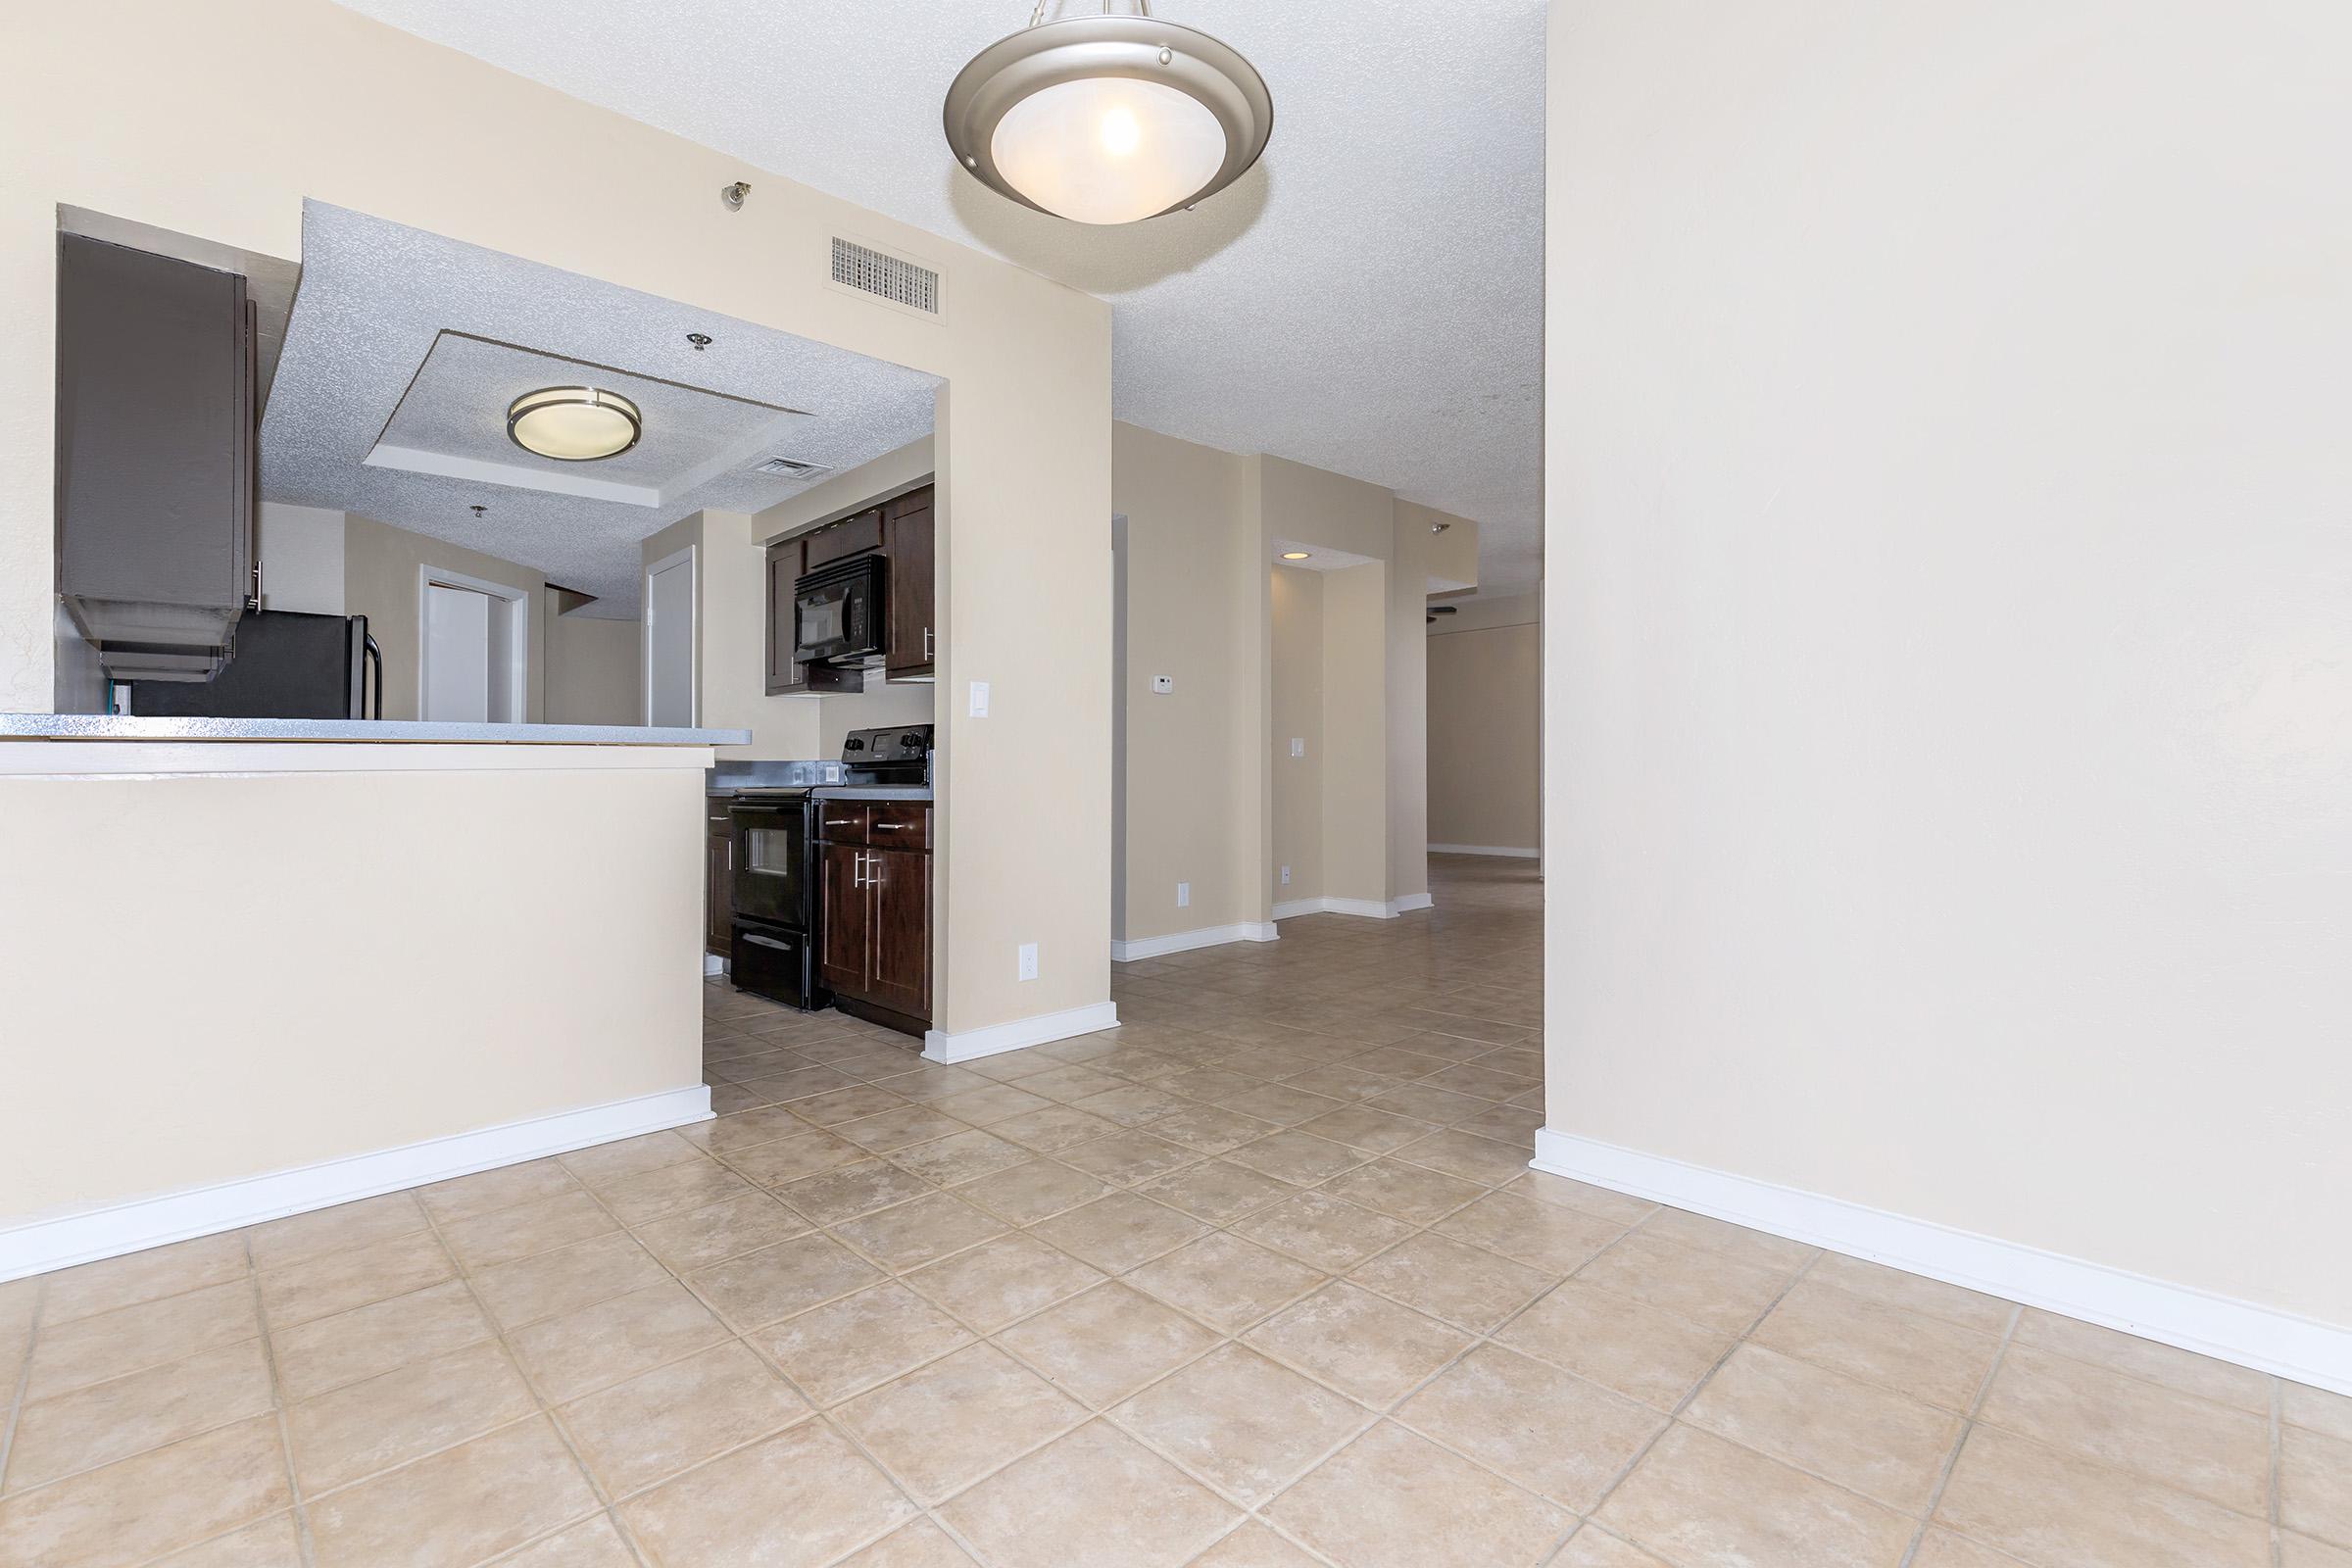 SPACIOUS FLOOR PLANS AT THE ENCLAVE AT 1550